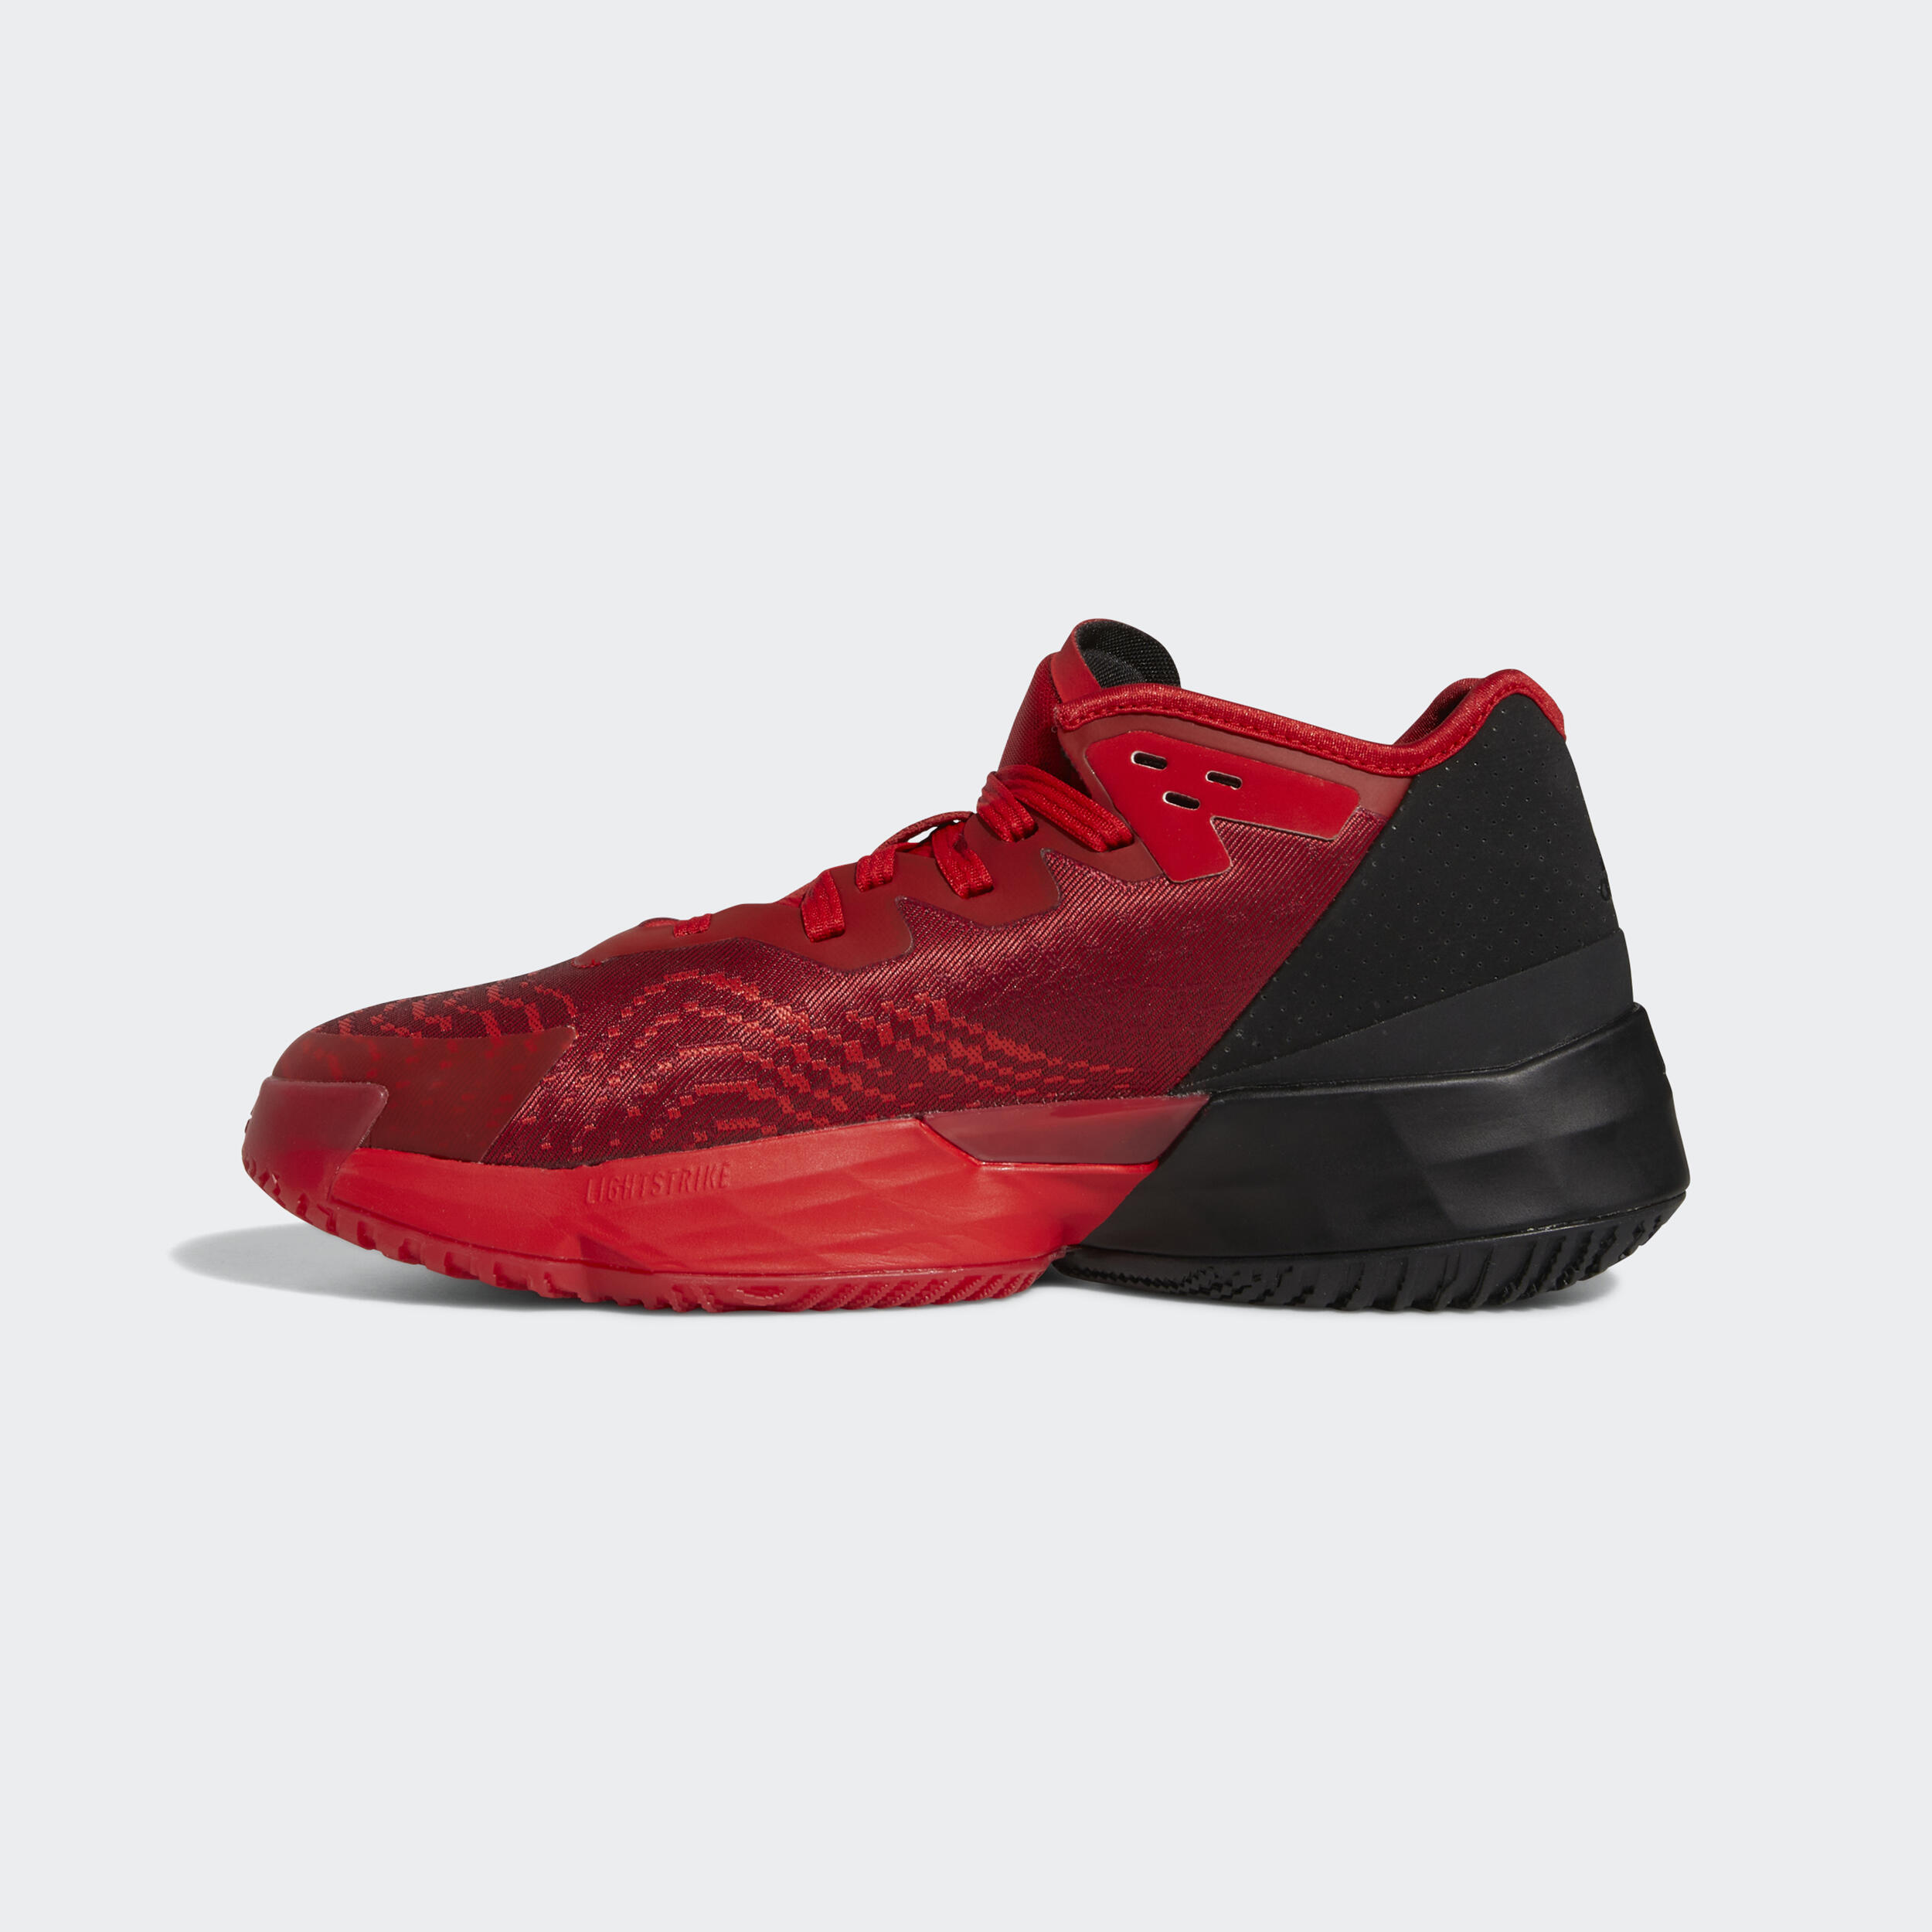 Men's Basketball Shoes D.O.N Issue 4 - Red/Black 4/4